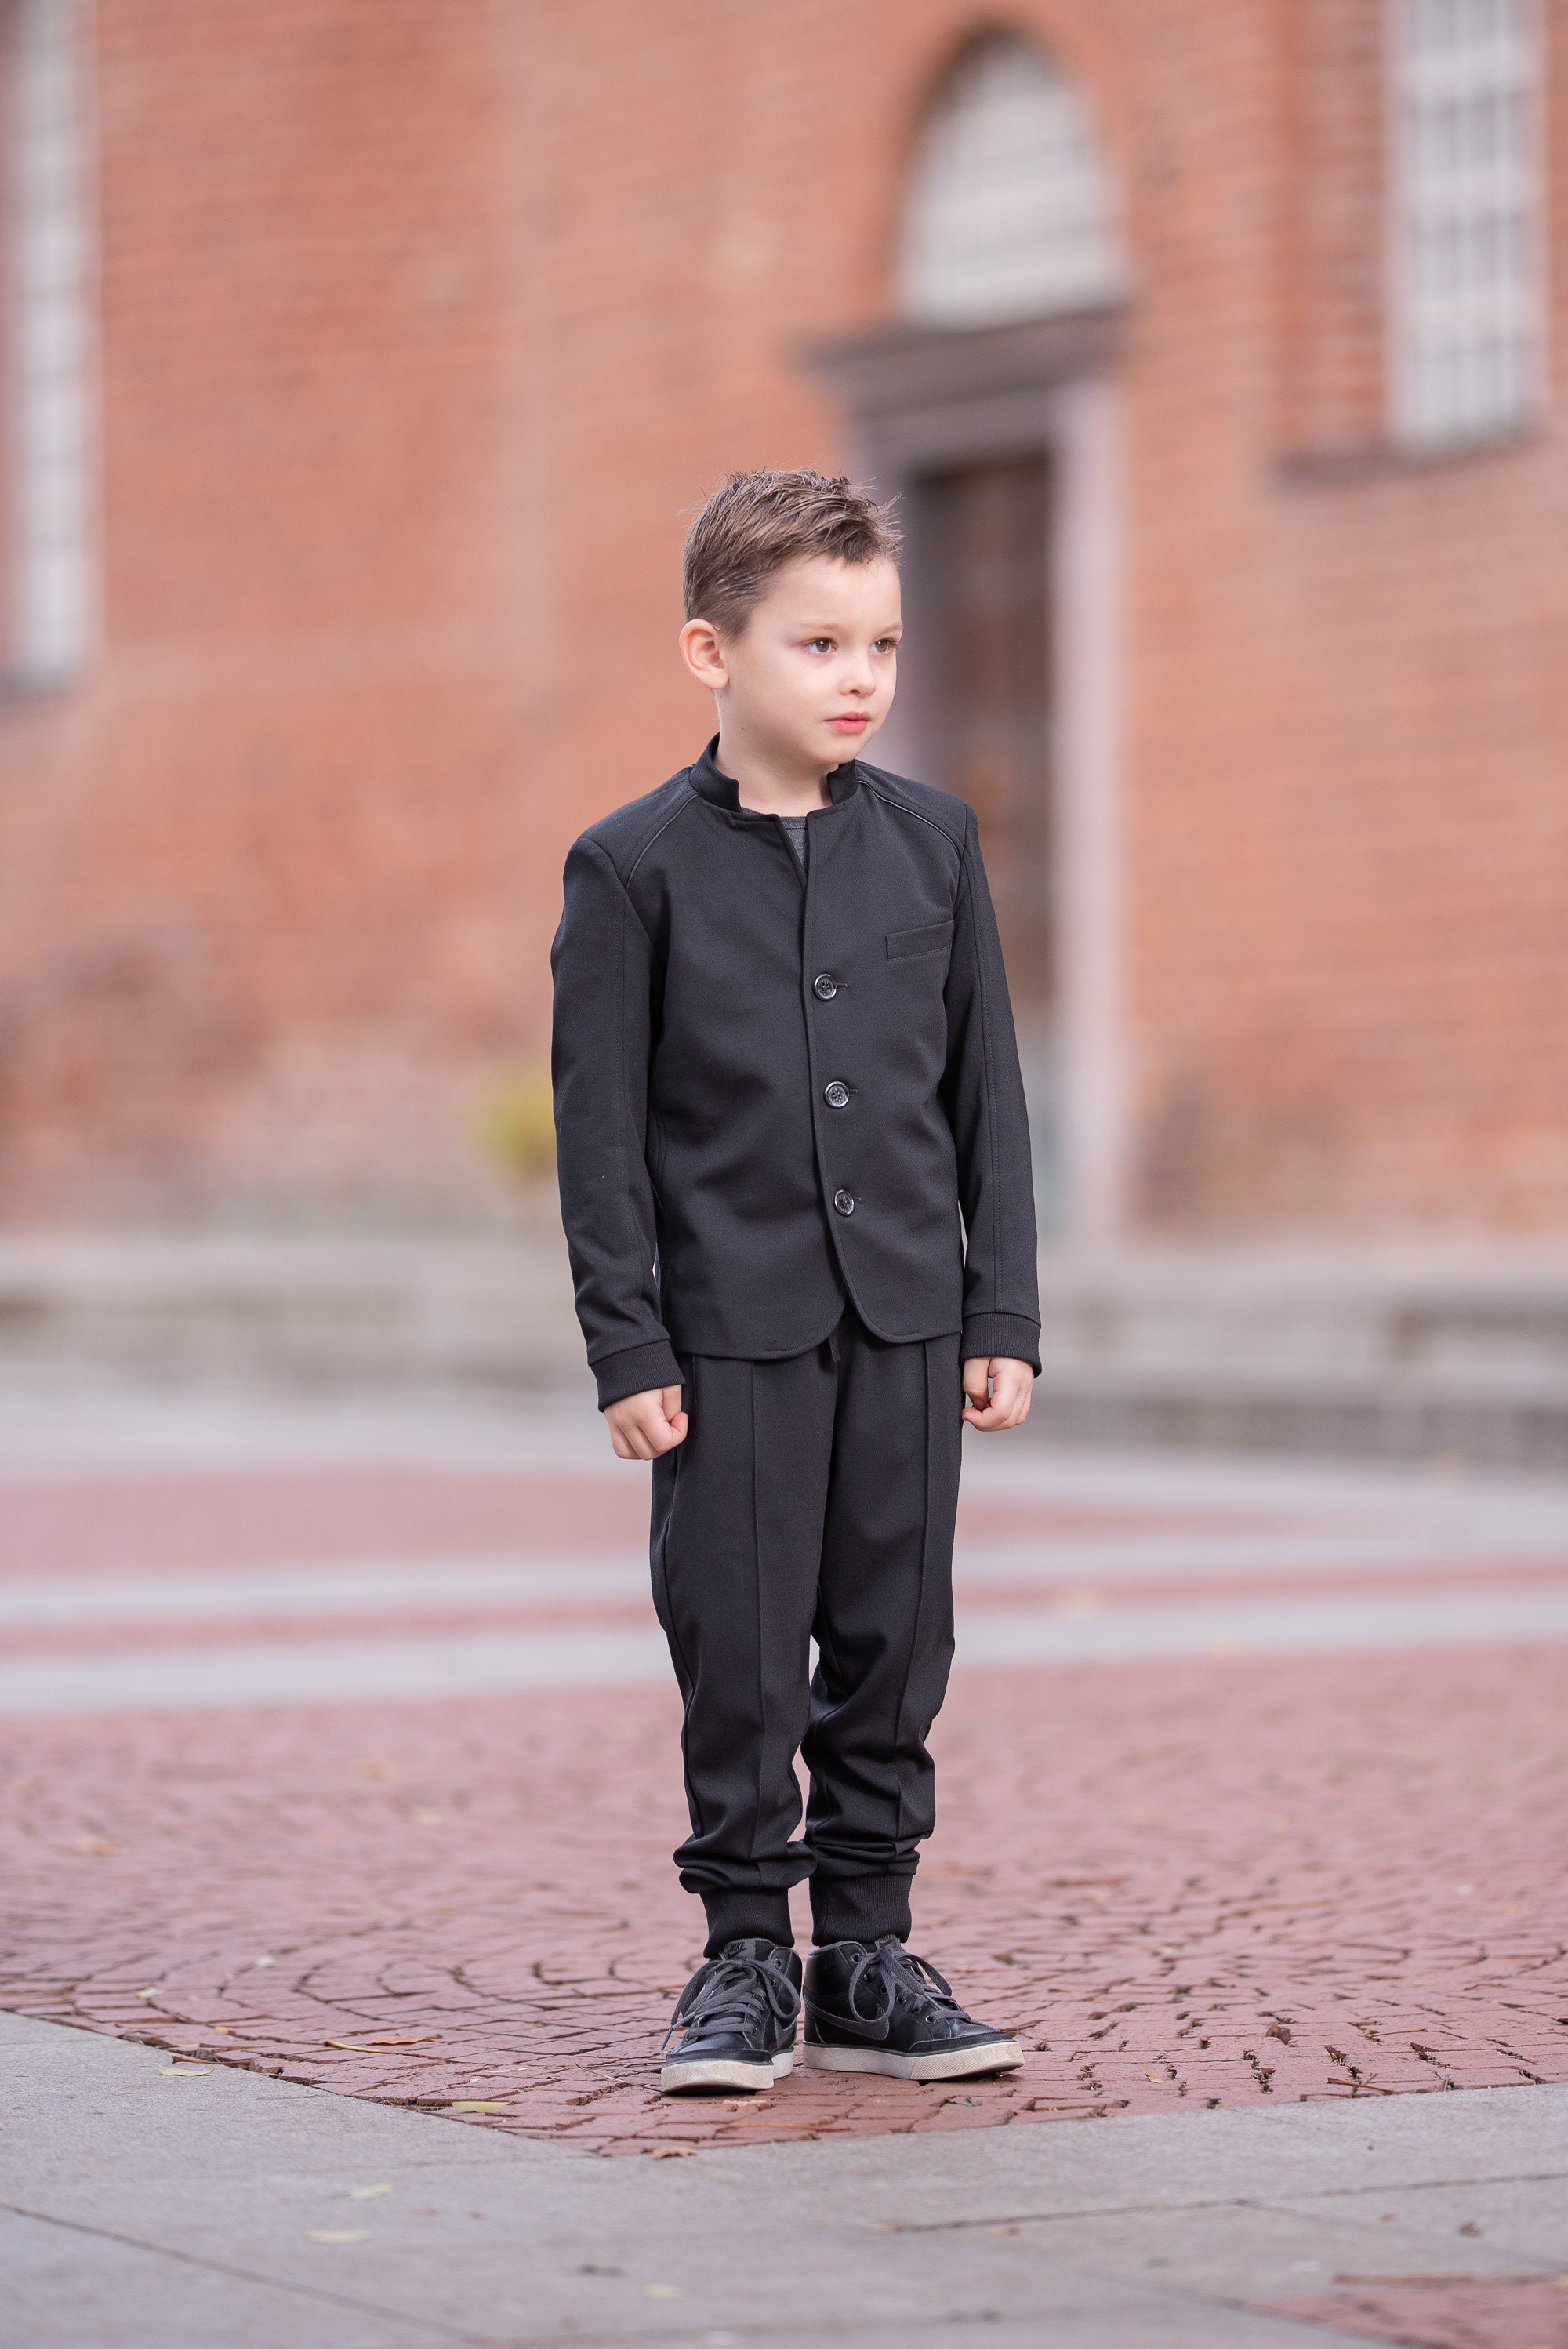 Stylish and comfortable designer wear for boys